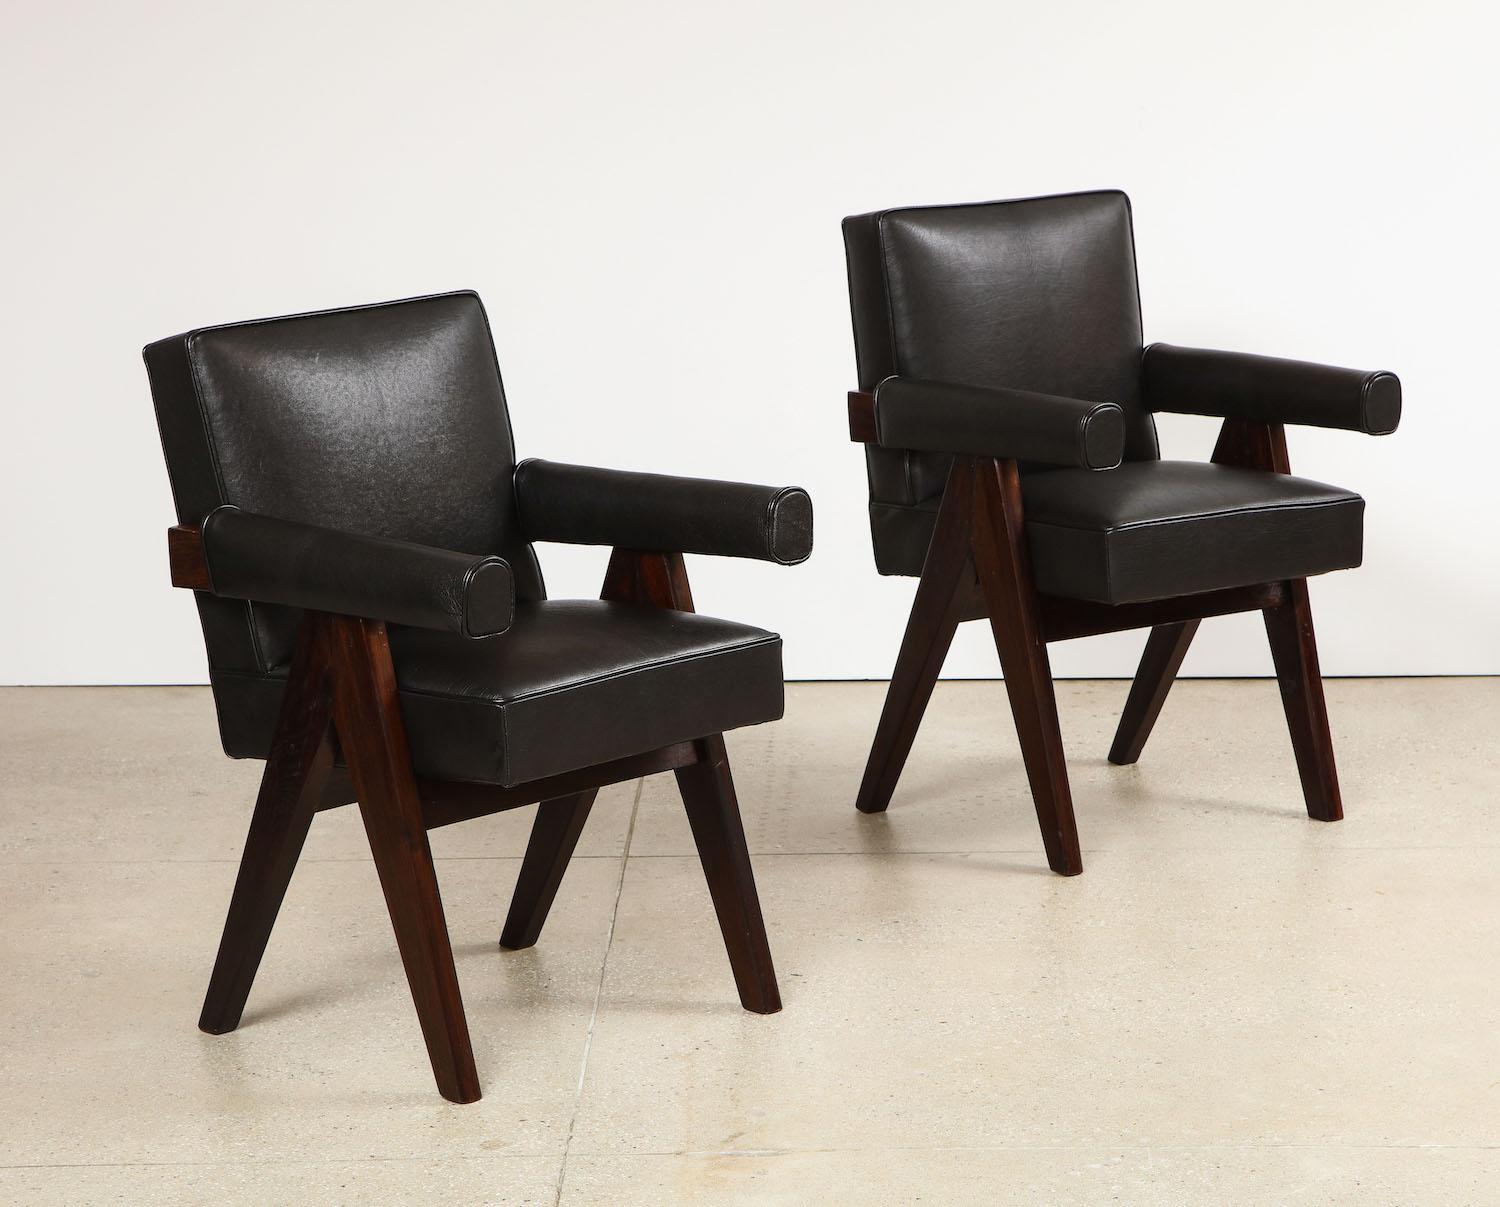 Pair of Senat Armchairs by Pierre Jeanneret.  Dark-stained teak, leather. Produced for the High Court Legislative Assembly, Chandigarh, India. Recently re-upholstered.